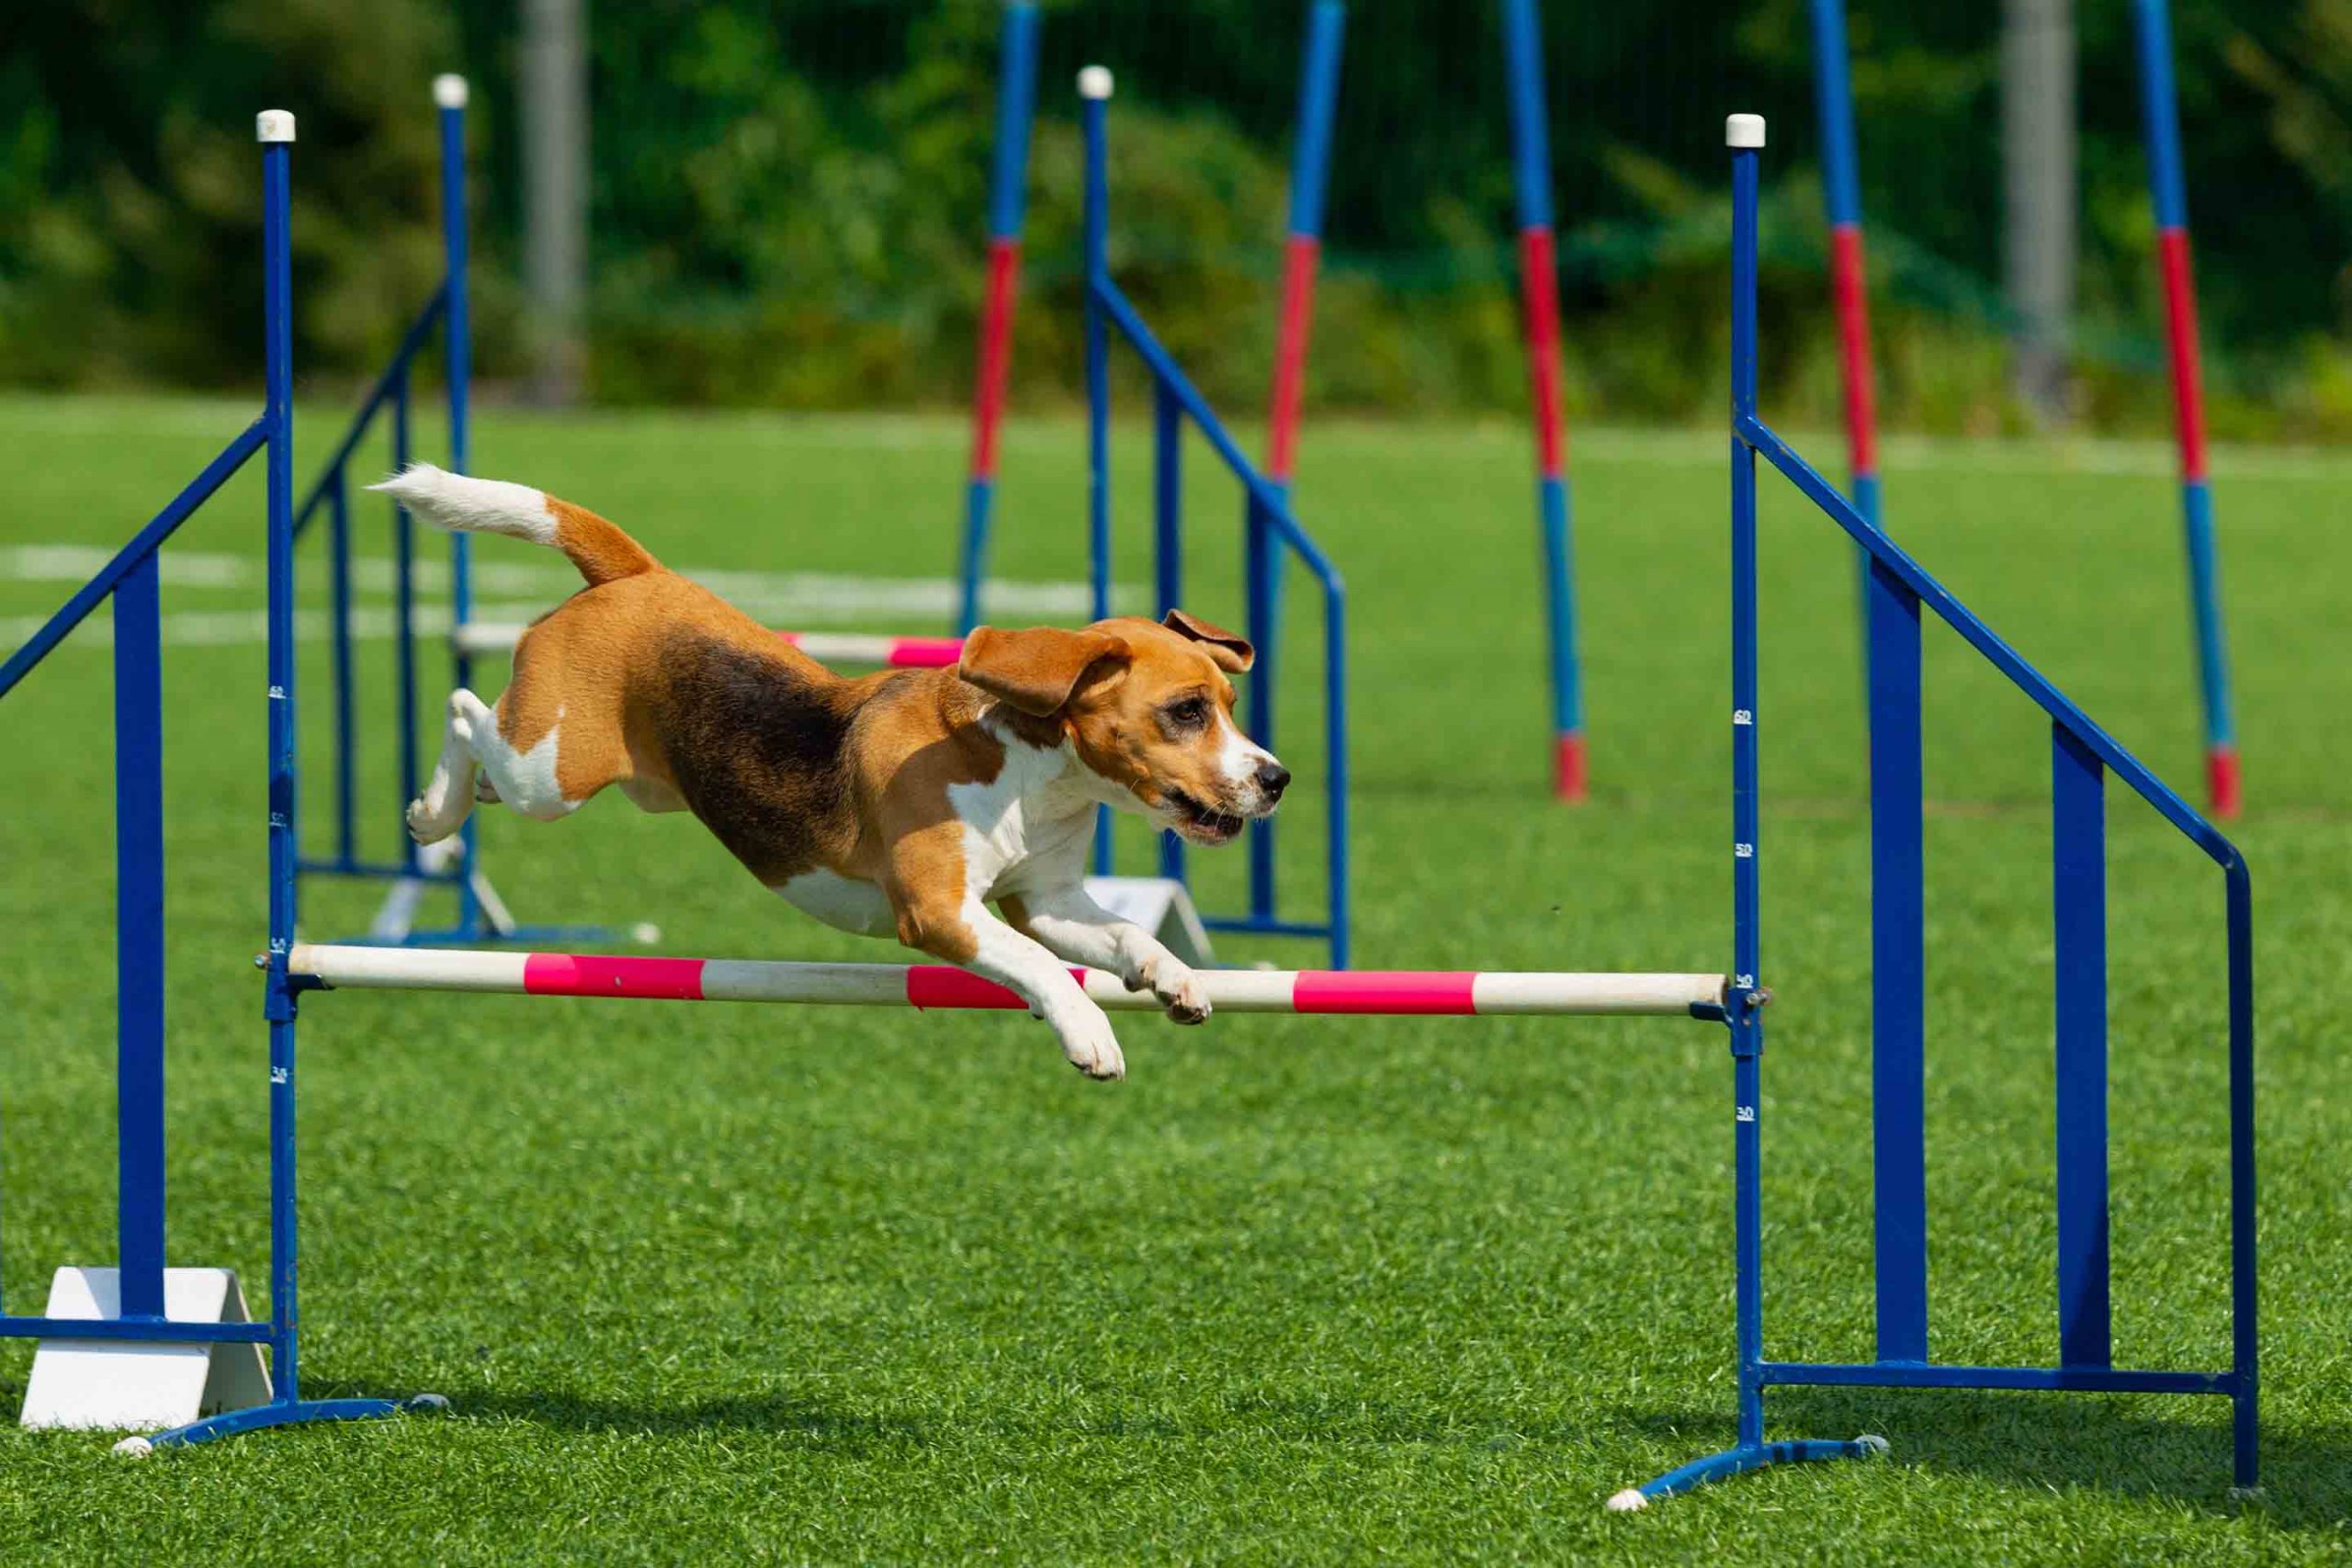 a small dog jumps over a hurdle